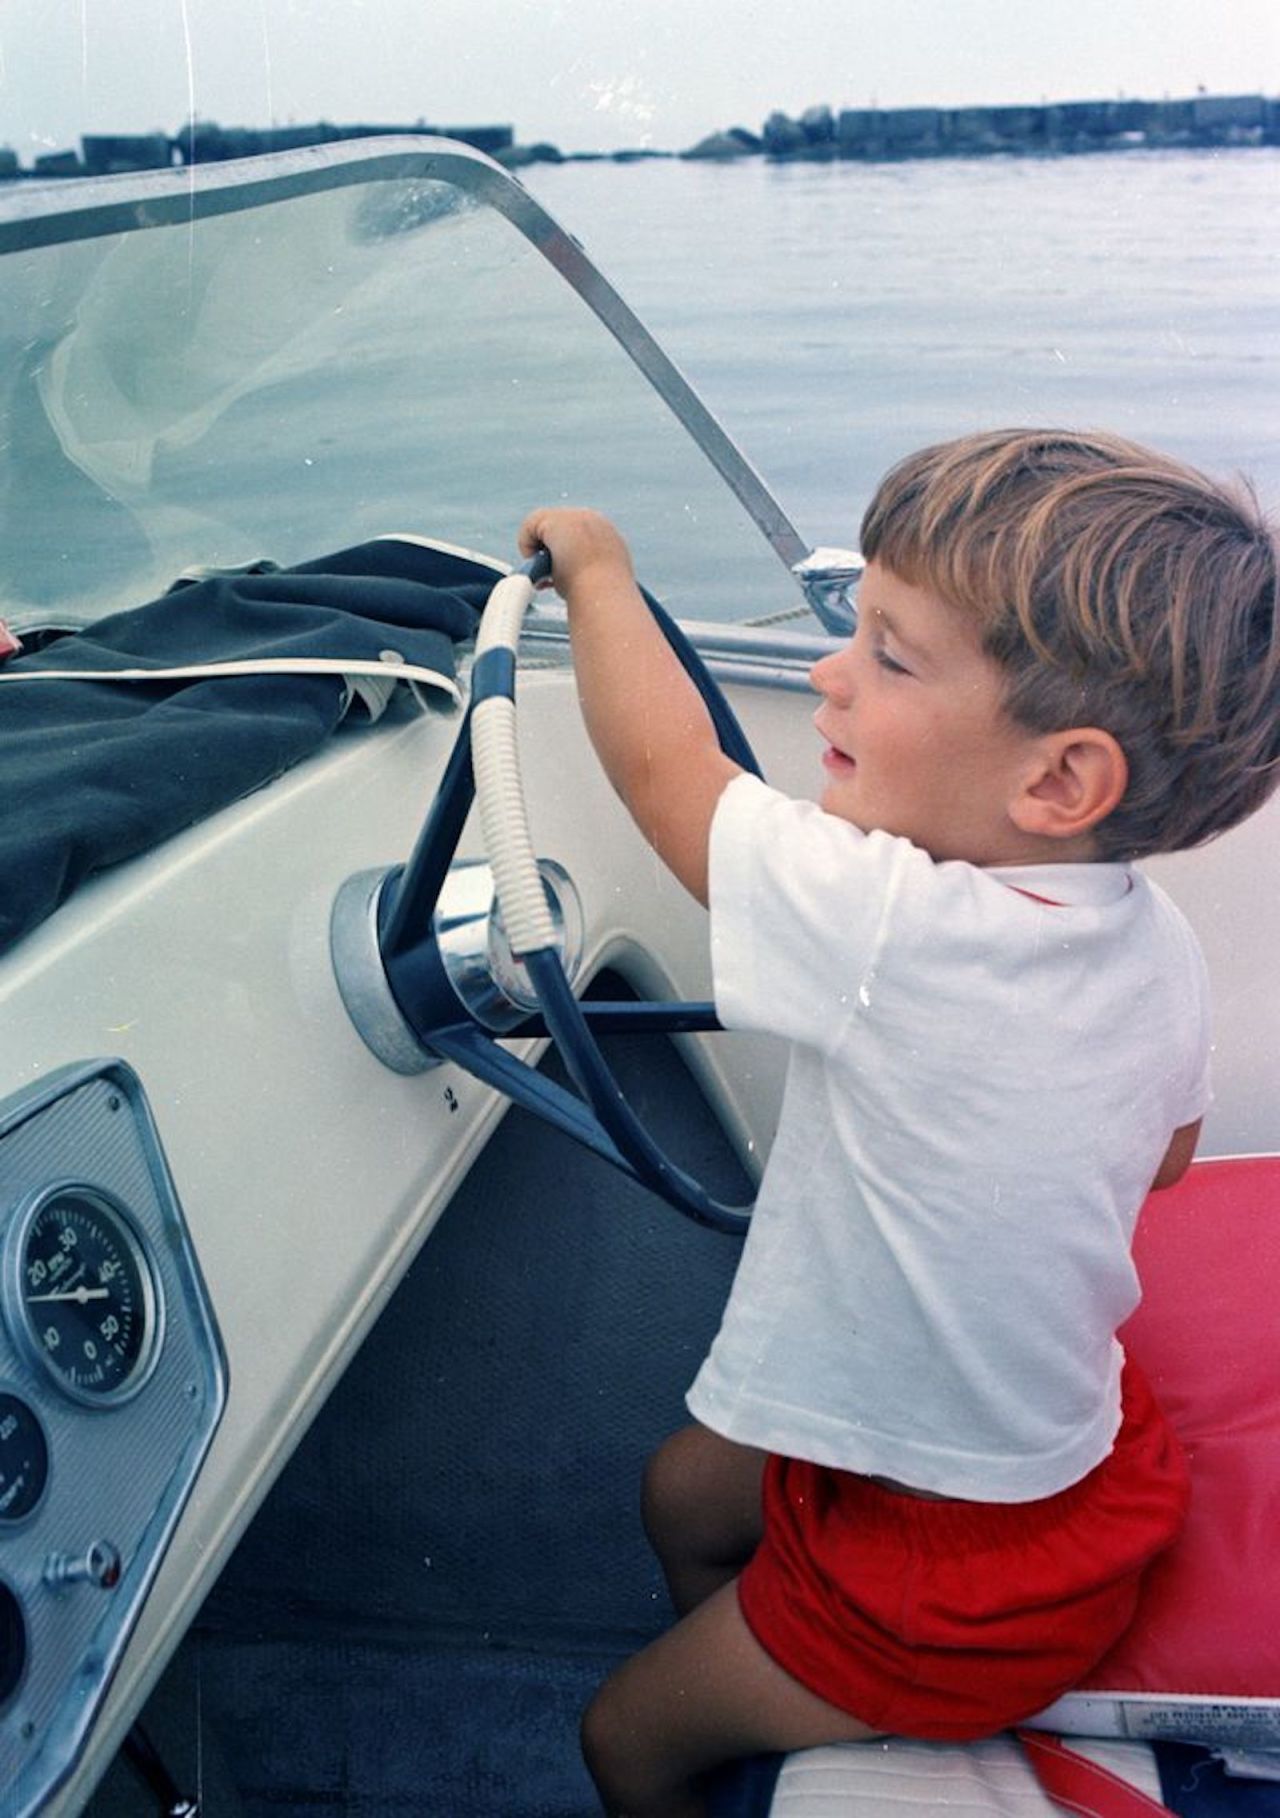 John Jr. takes the wheel of a speedboat during Labor Day weekend in 1963.